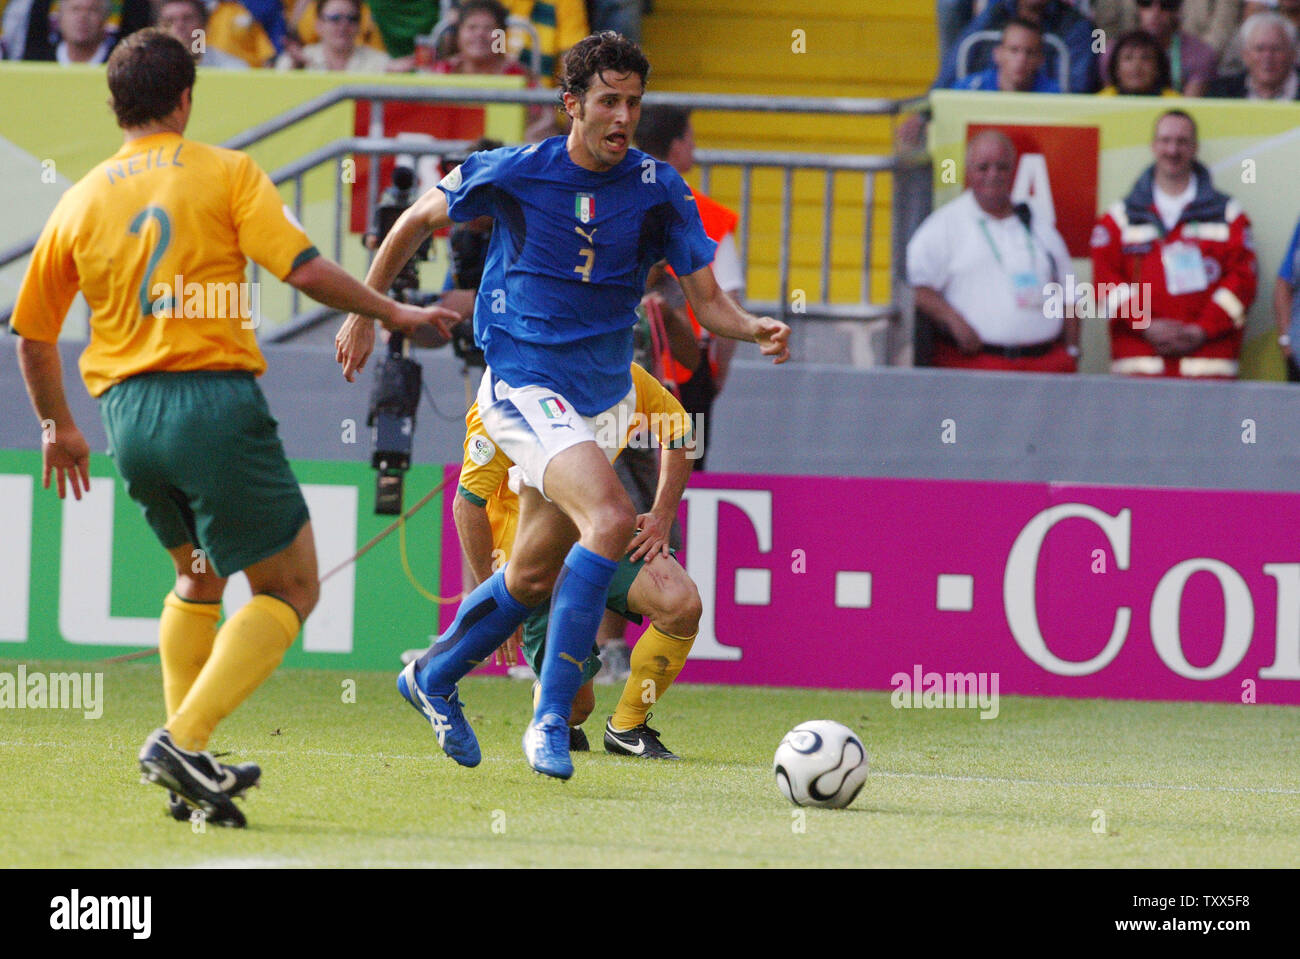 In play leading up to a game deciding penalty,  Italy's Fabio Grosso (3) dribbles toward the goal as Australia's player Luca Neill (2) moves in from left  in World Cup soccer in Kaiserslautern, Germany on June 26, 2006. Italy eliminated Australia from World Cup competition 1-0.  (UPI Photo/Arthur Thill) Stock Photo